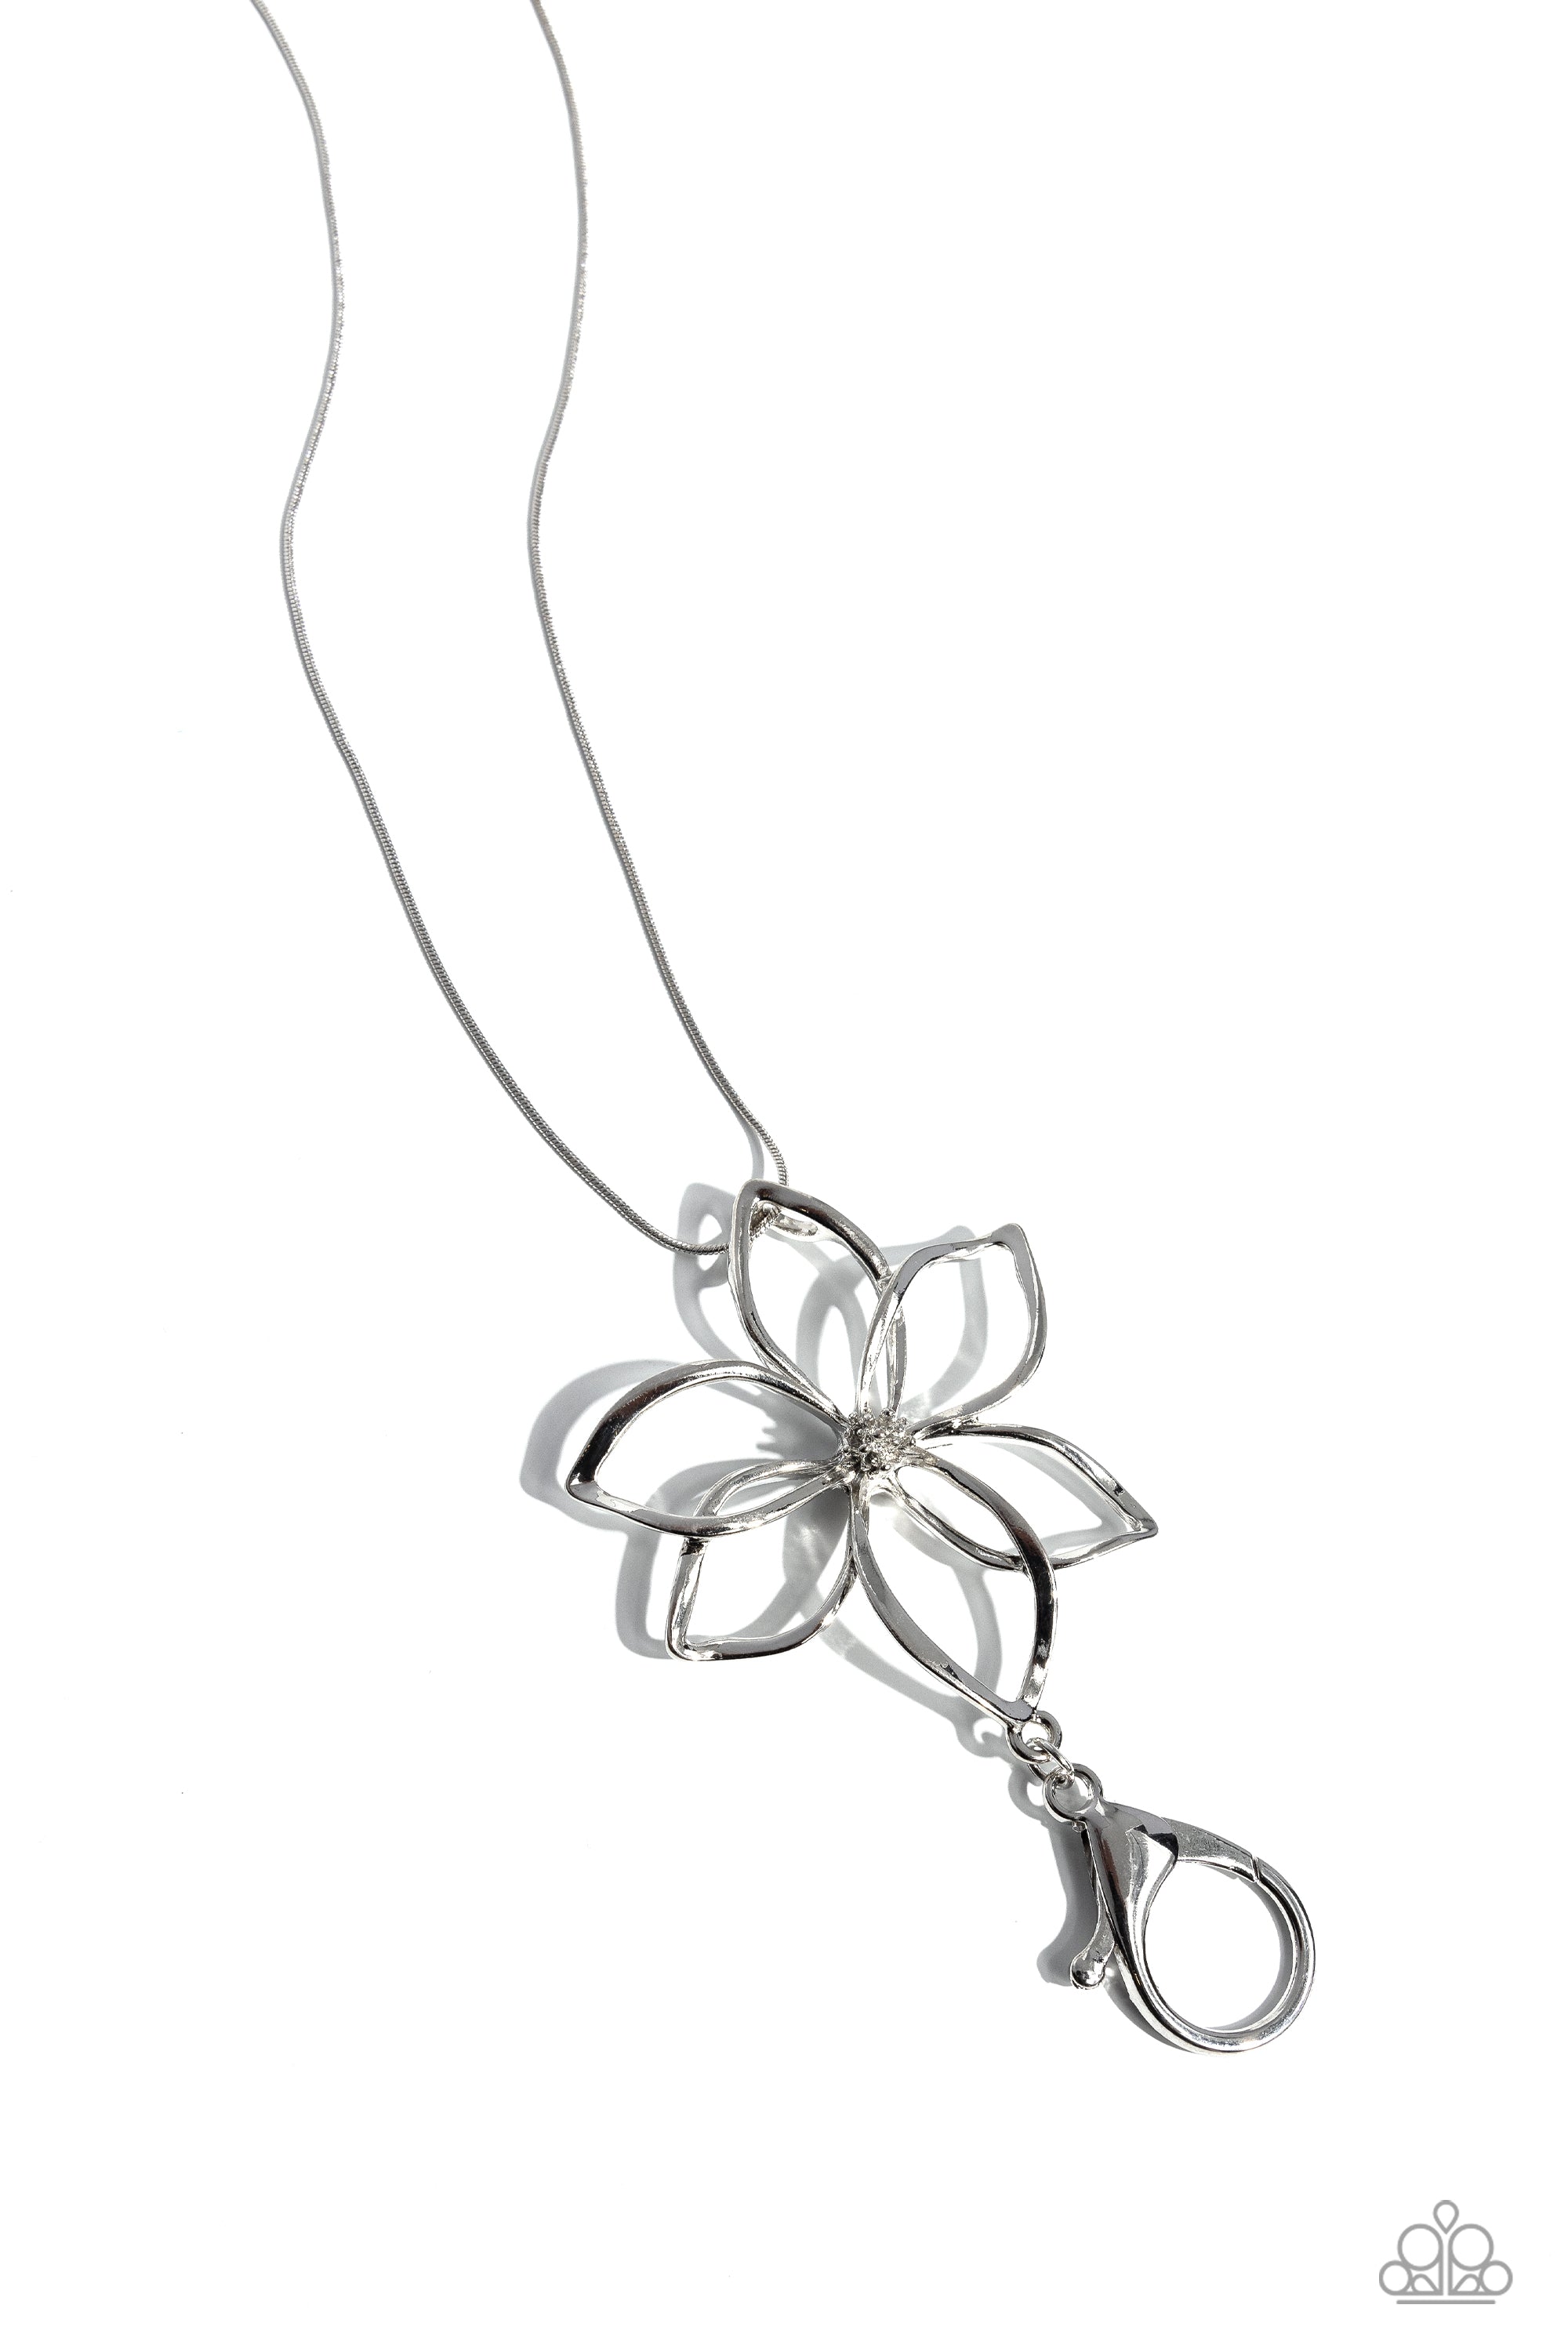 Flowering Fame Silver Lanyard Necklace - Paparazzi Accessories- lightbox - CarasShop.com - $5 Jewelry by Cara Jewels